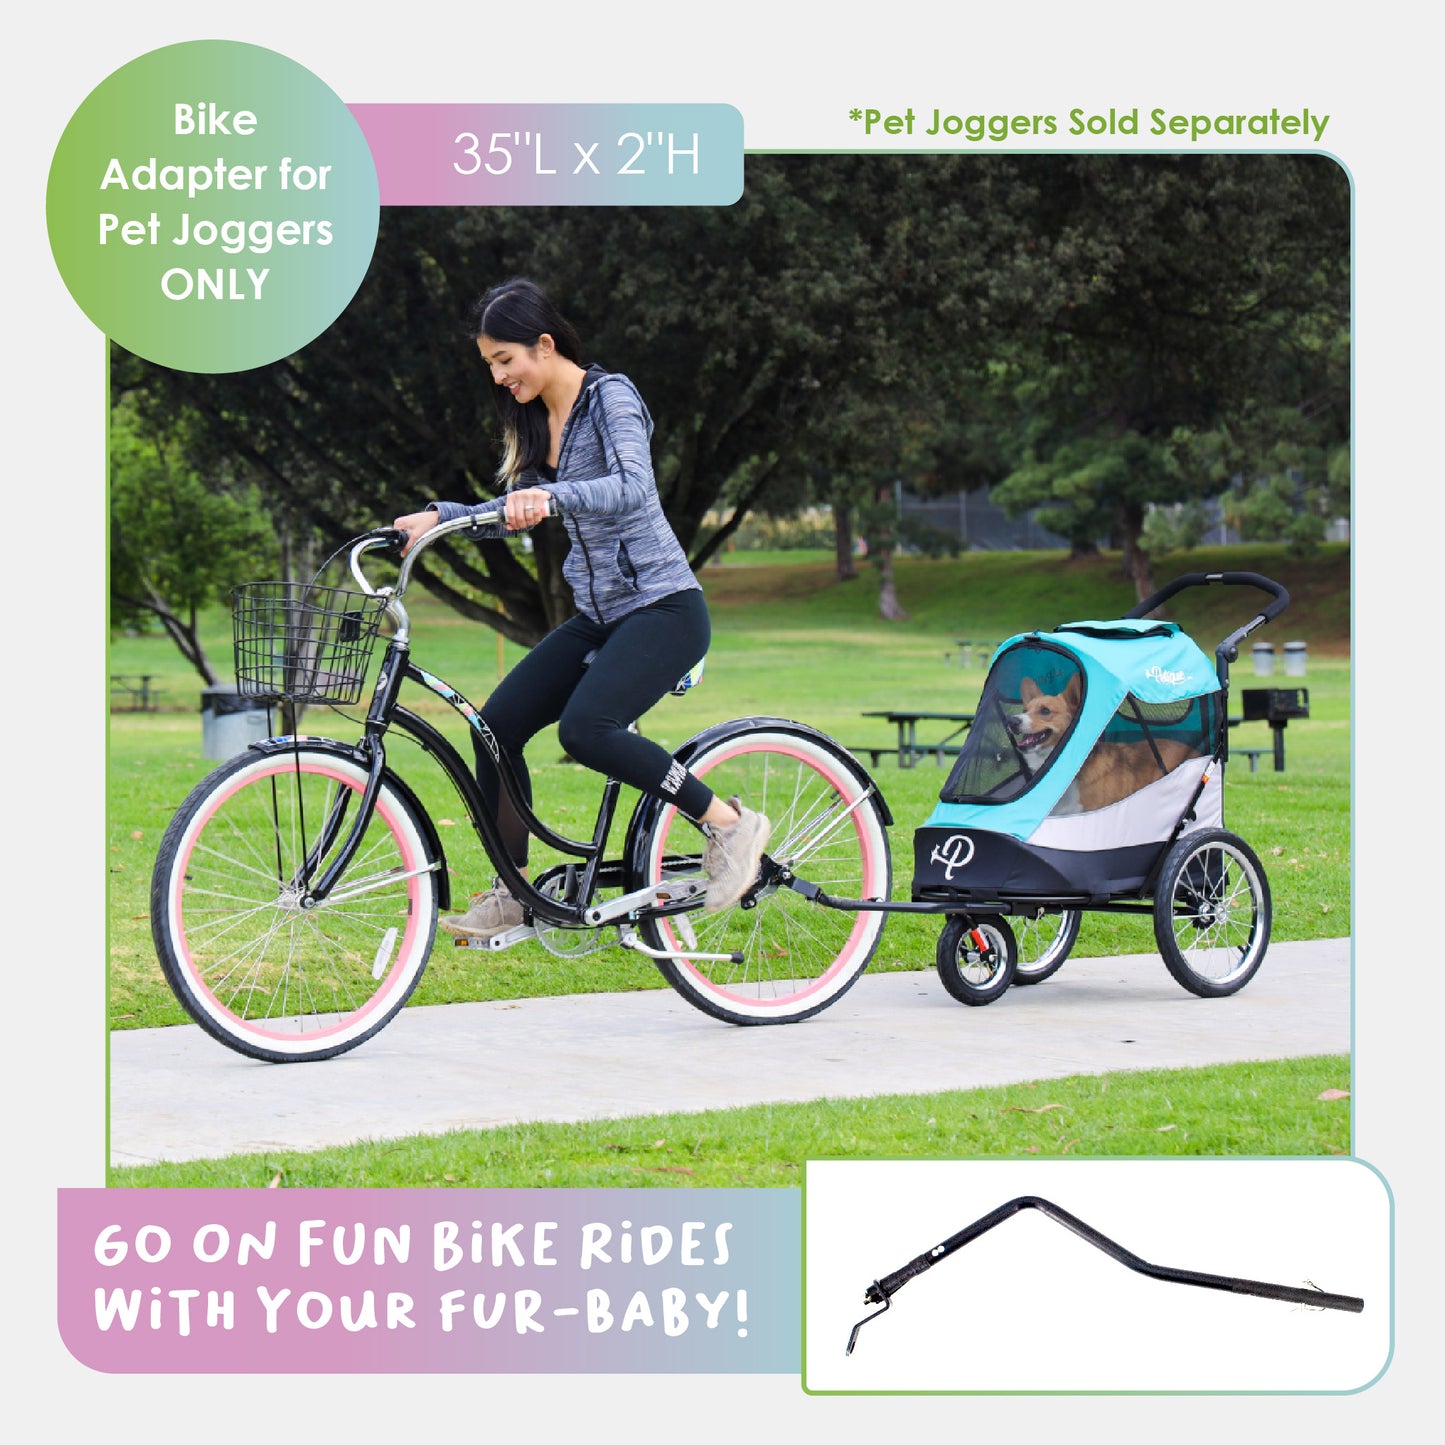 bike adapter for pet joggers only